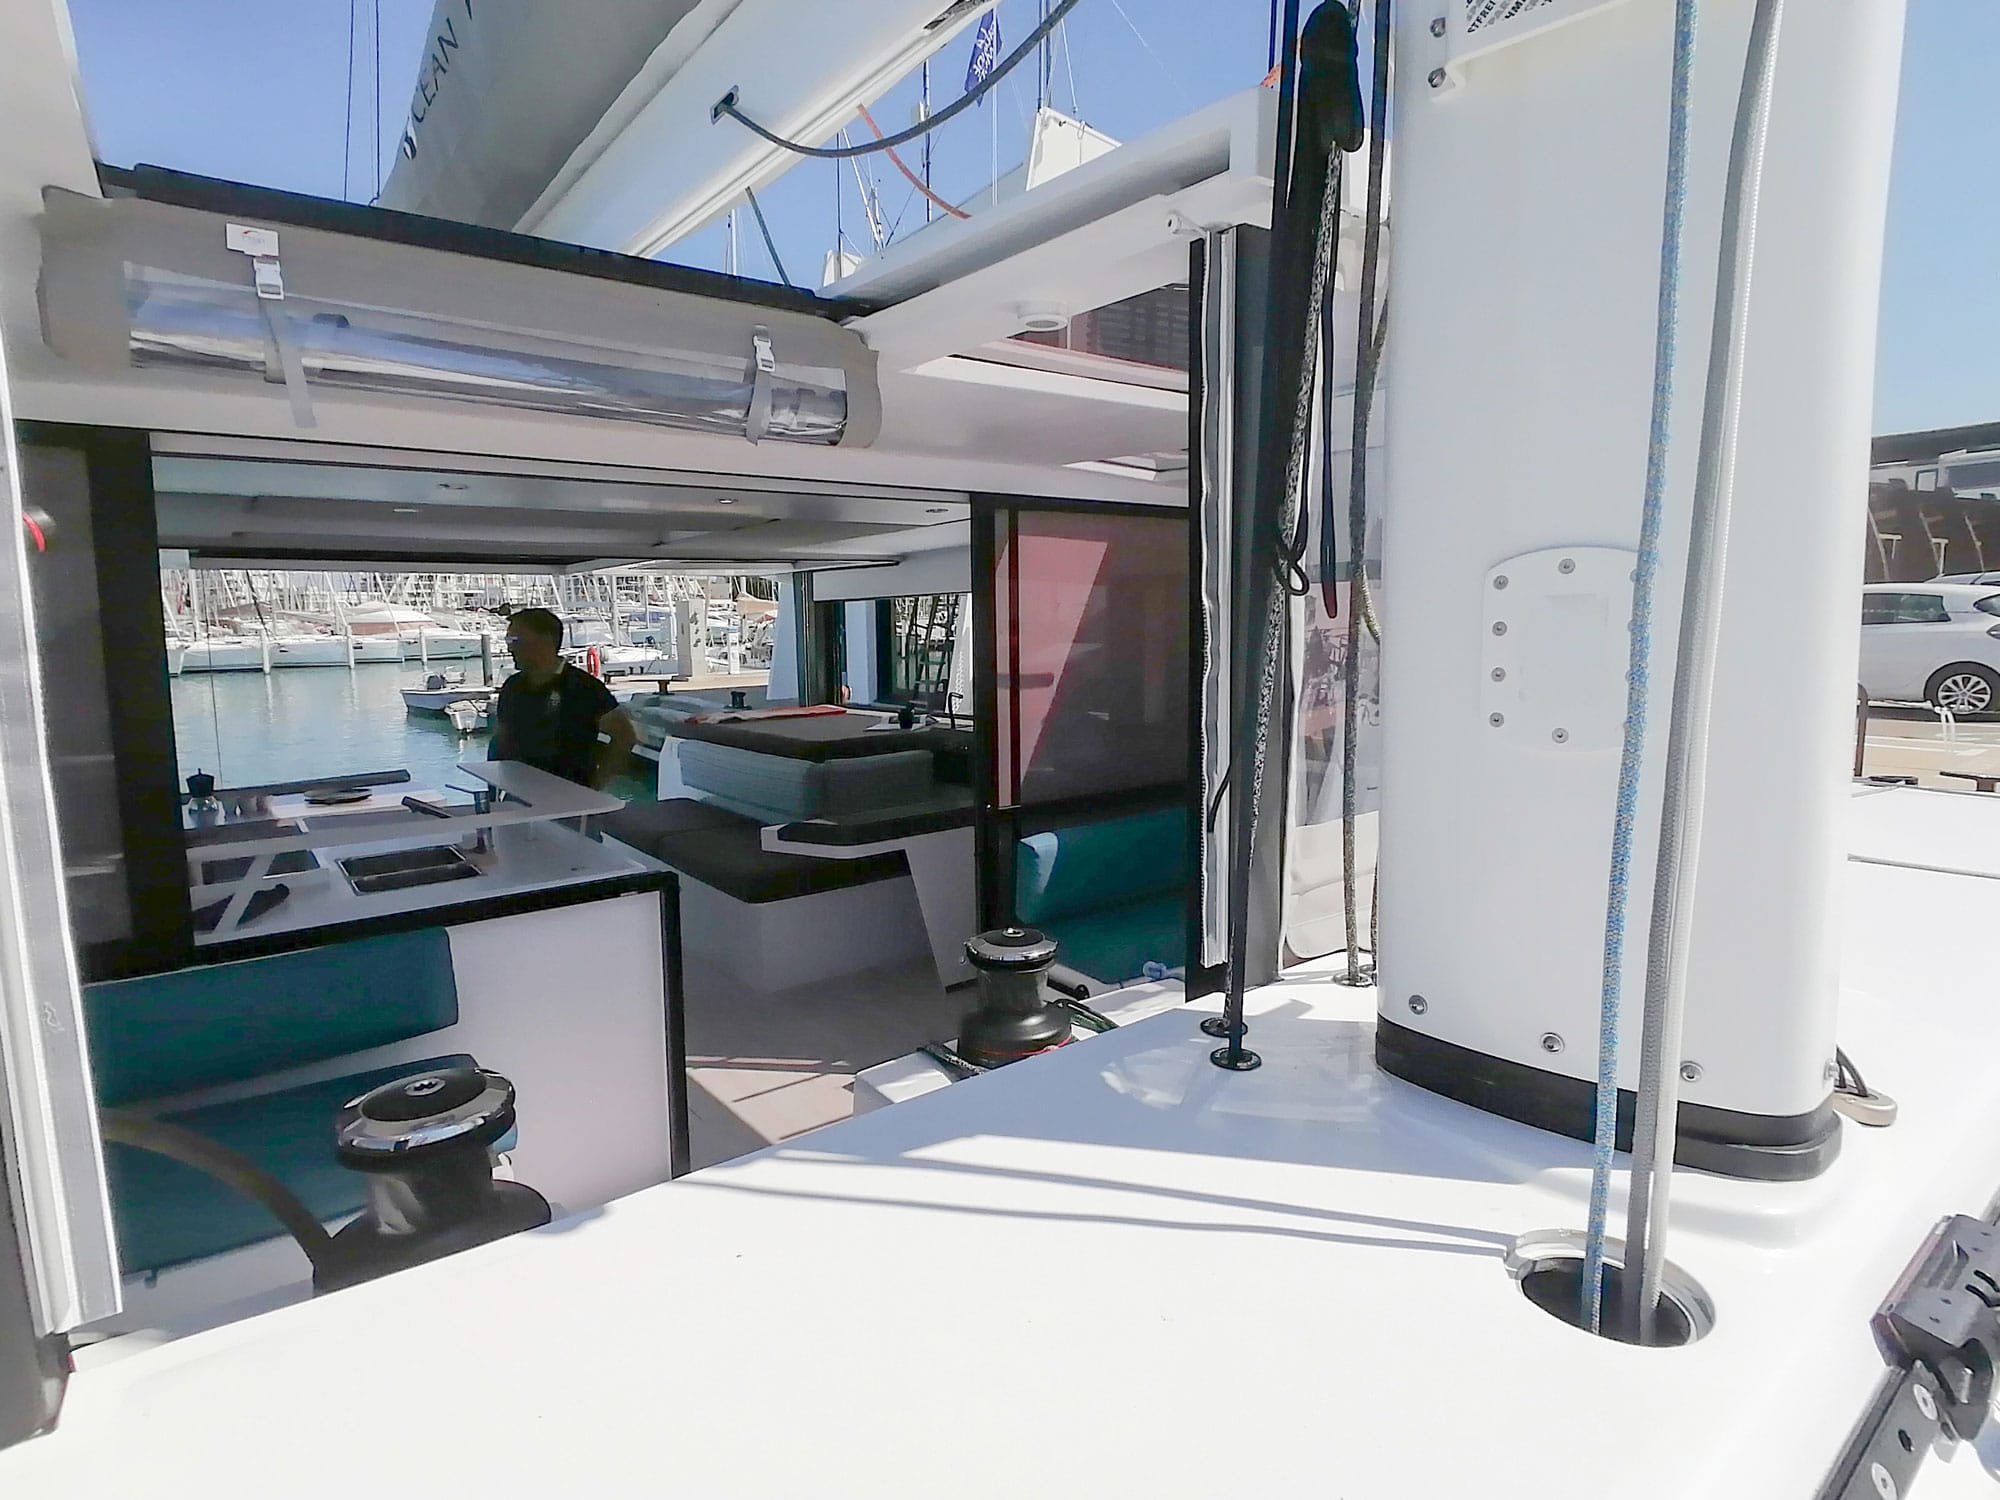 Windelo 54 - Luxury yacht charter France & Boat hire in France French Riviera Hyeres Hyeres 6